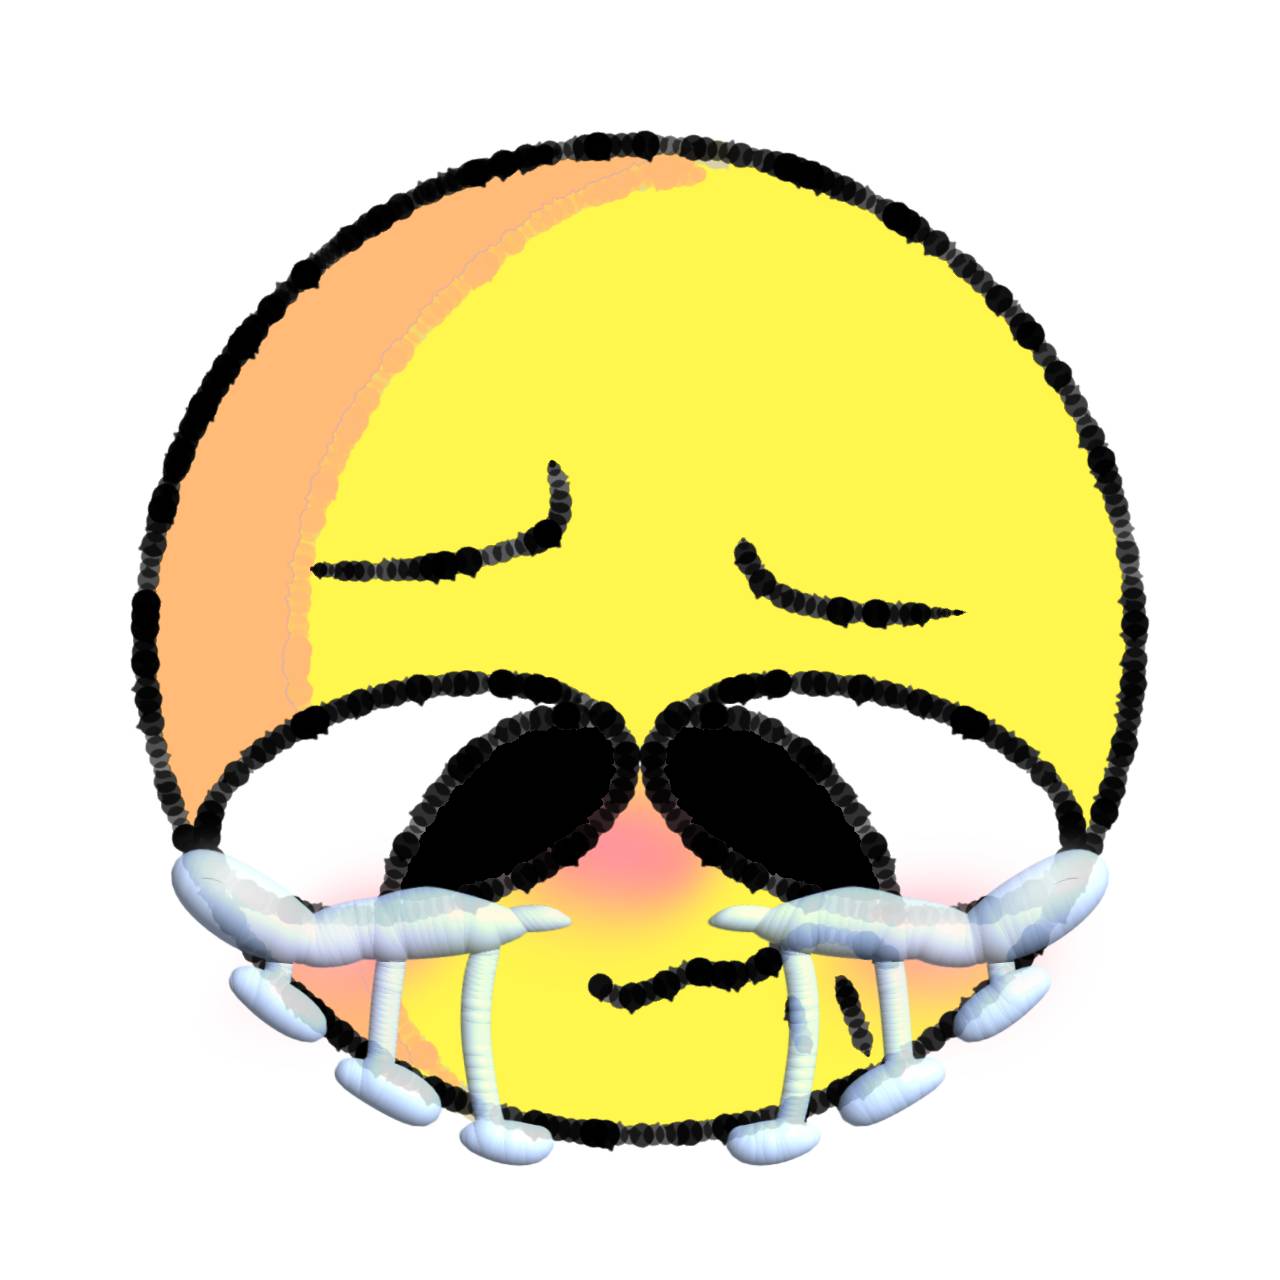 Cursed emoji crying in 3d tears by Coneys-hell-world on DeviantArt